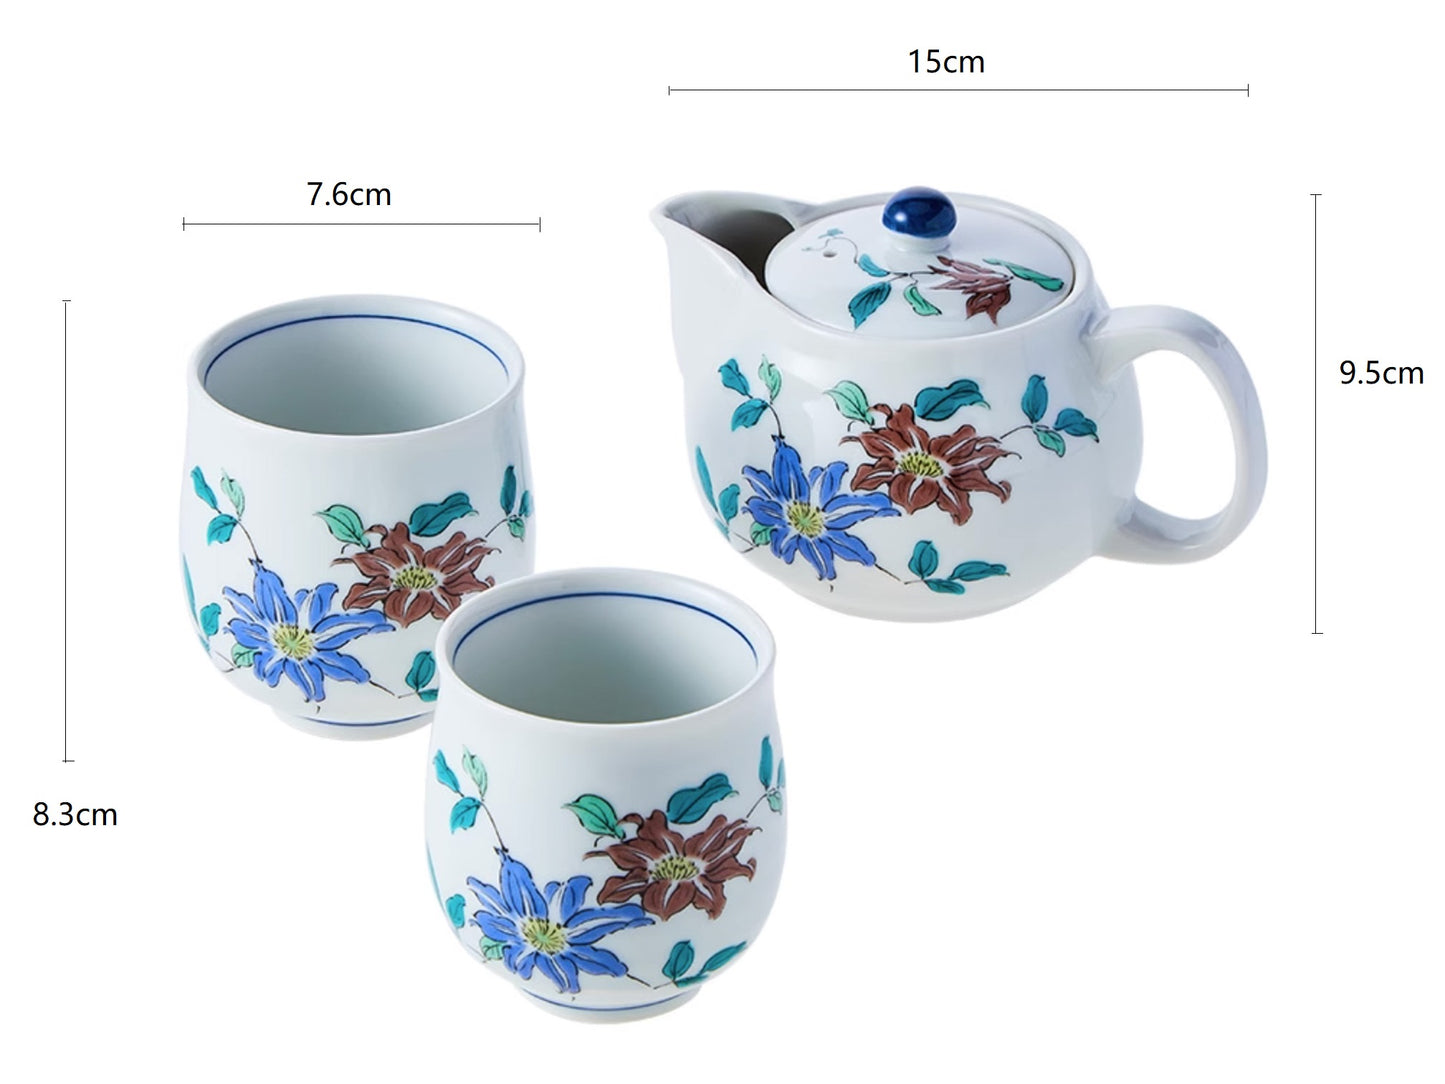 2023391set Kutani-Ware Grass And Flower One Pot 360ml Two Cups 7.6*8.3cm+7.2*7.5cm With Gift Box